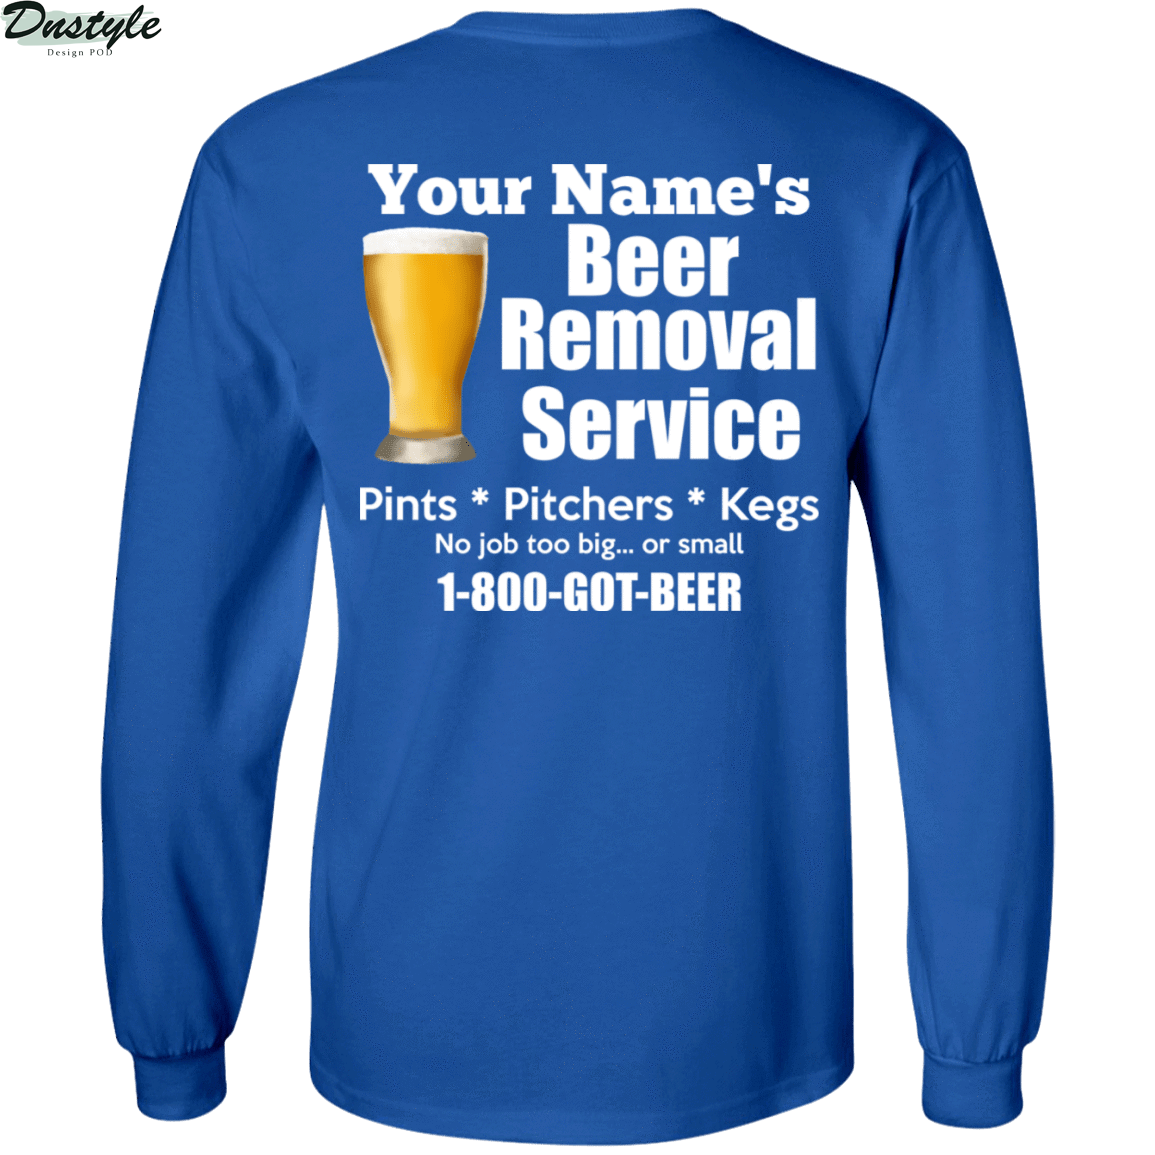 Personalized custom name beer removal service pints pitchers kegs shirt 3